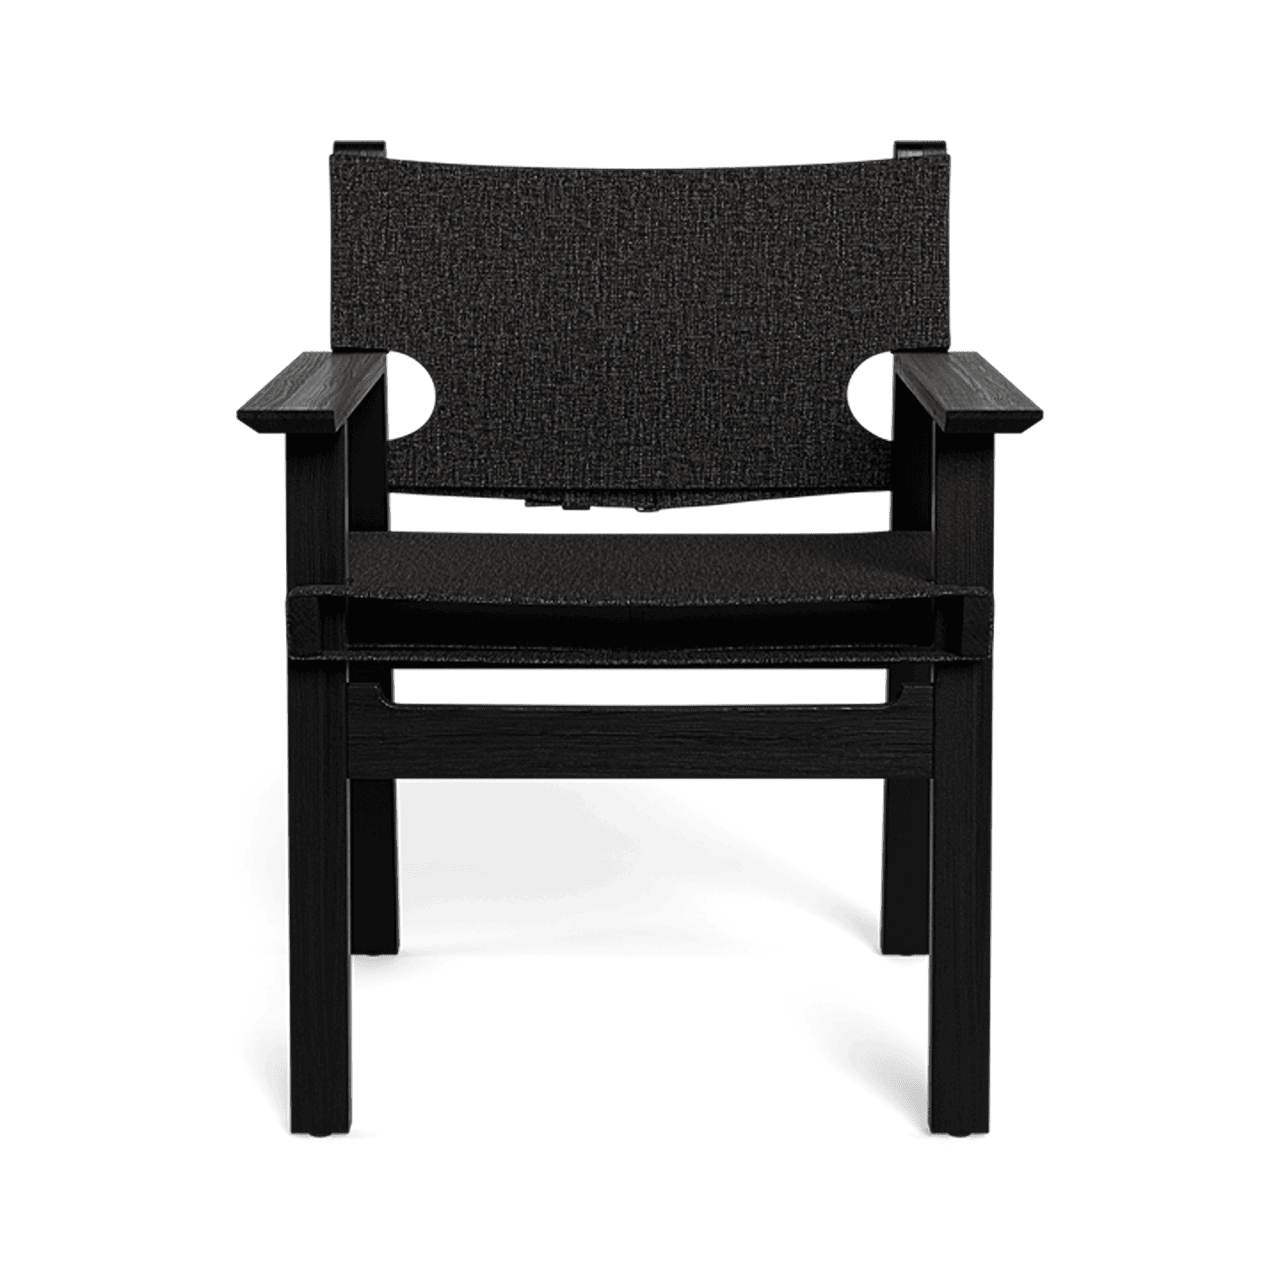 MLB DINING CHAIR-Teak charcoal frame with copacabana Midnight fabric